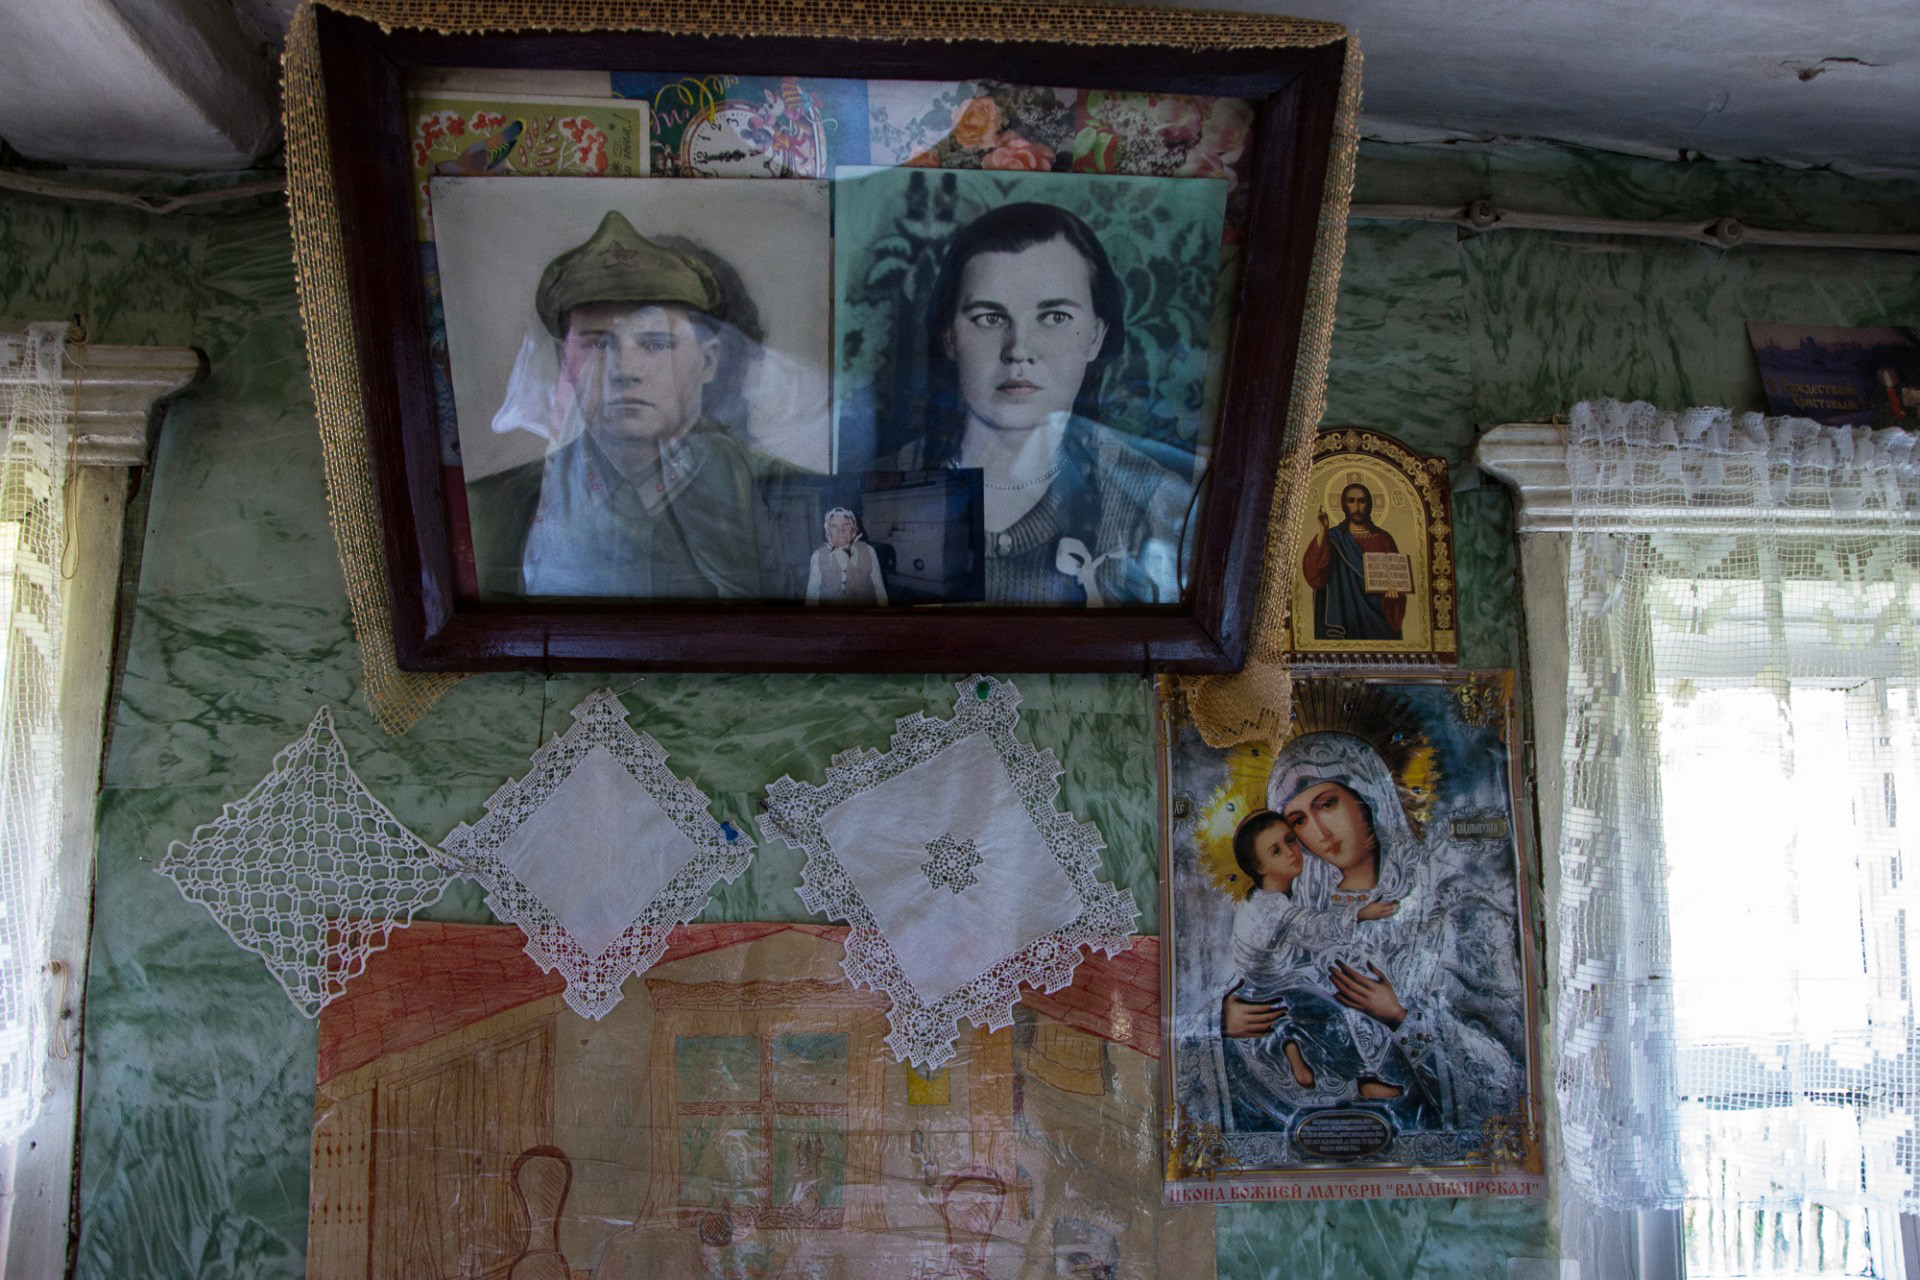 Portraits of Lyuska's mother and her husband killed in WWII